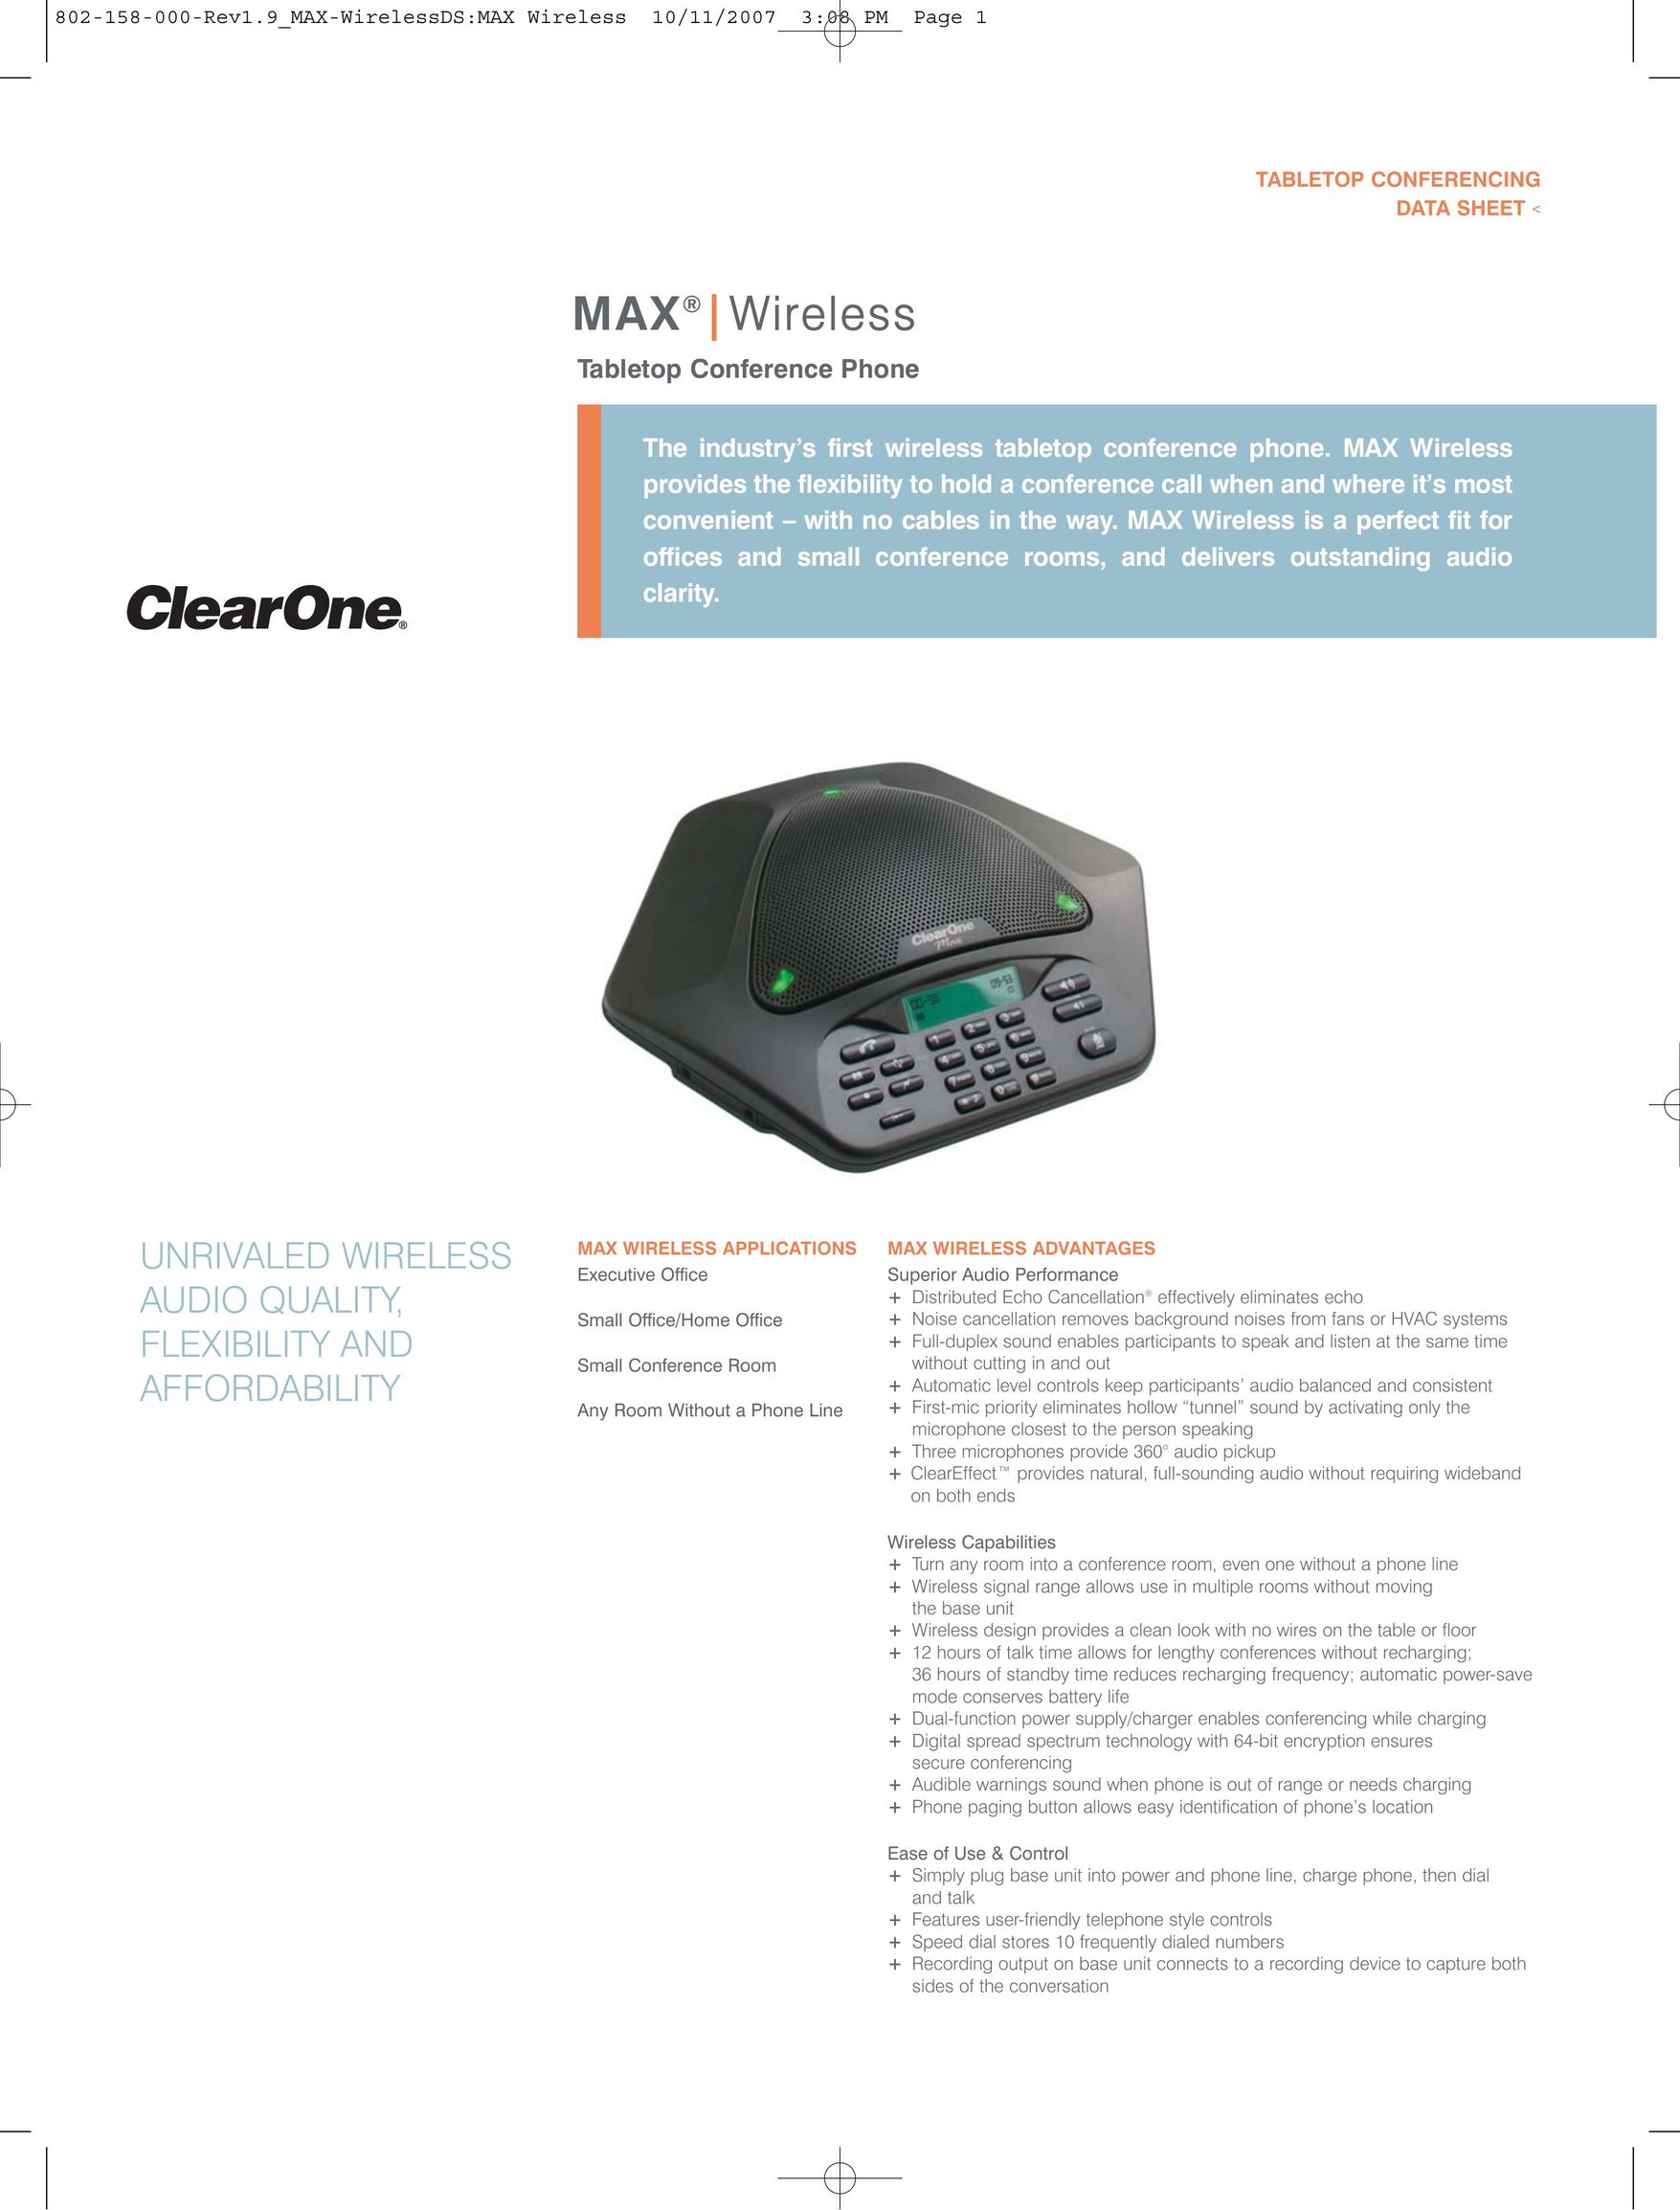 ClearOne comm 910-158-004 Conference Phone User Manual